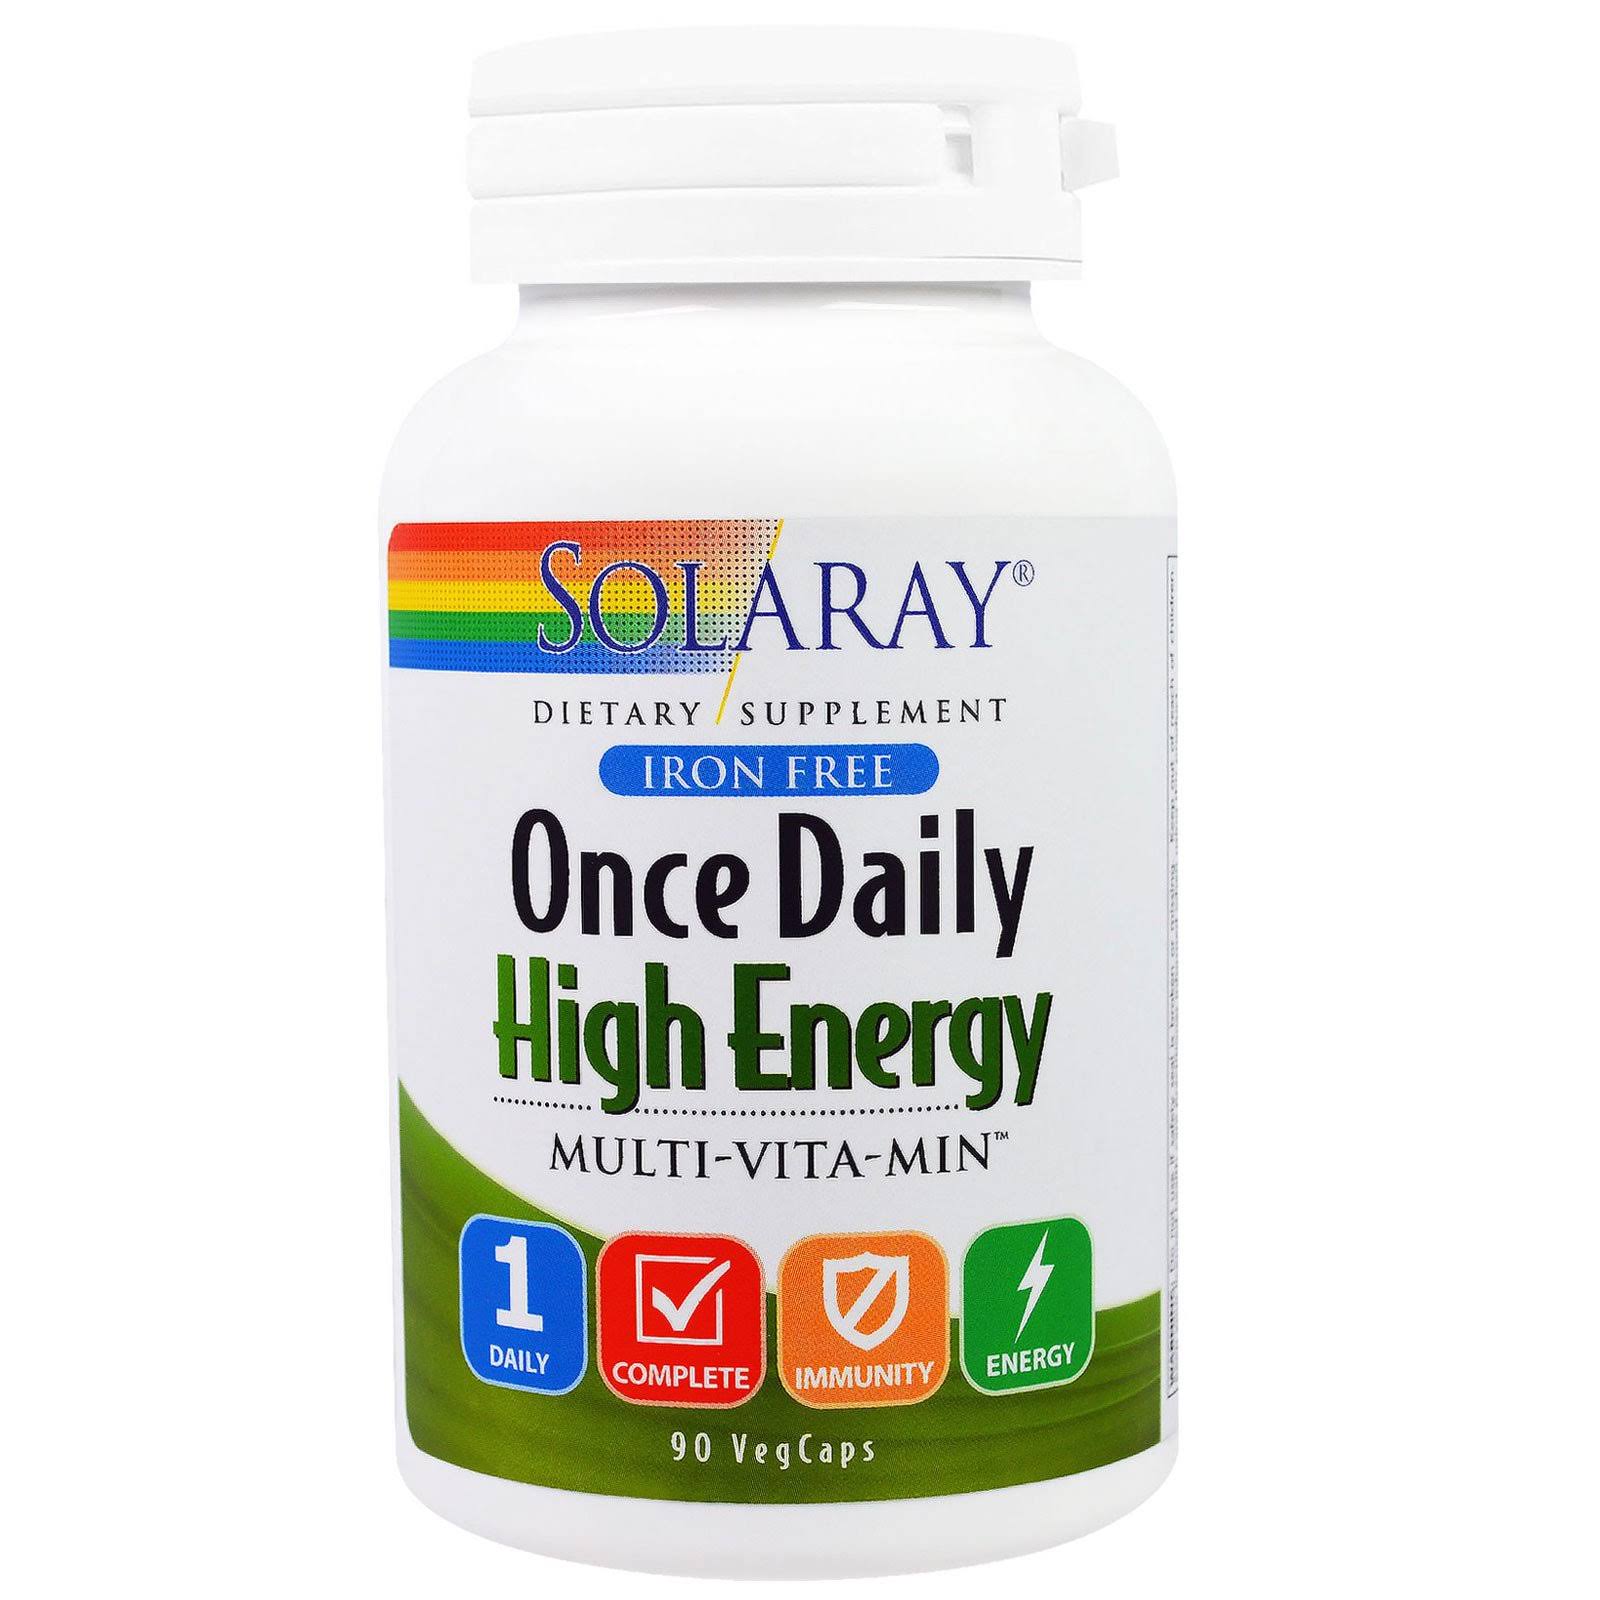 Solaray Once Daily High Energy Iron-free Supplement - 90 Count